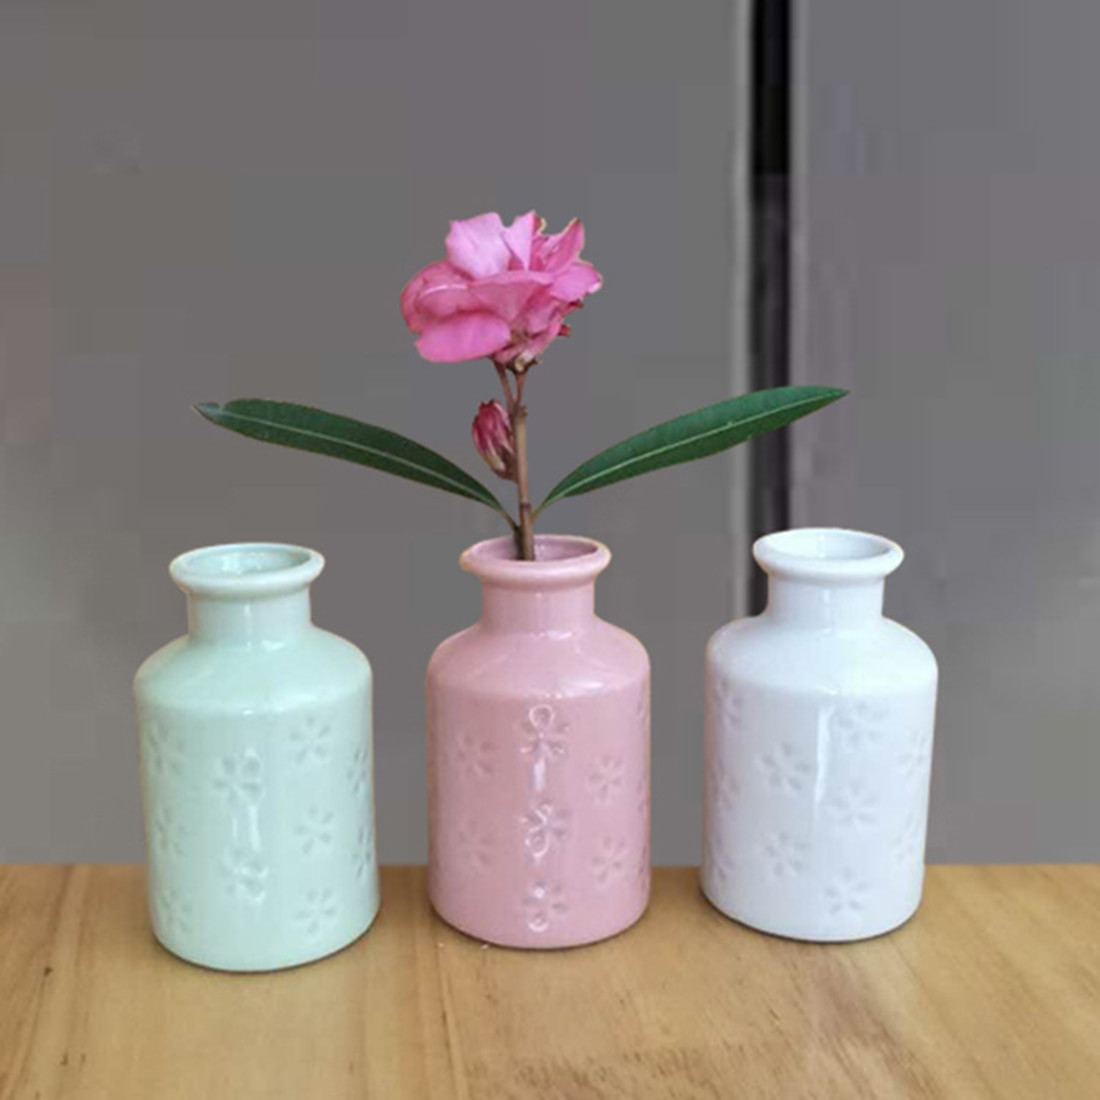 cotton vase decor of aliexpress com buy classic white ceramic vase chinese style home in aliexpress com buy classic white ceramic vase chinese style home decor contracted porcelain flower vases creative gift household wedding decoration from